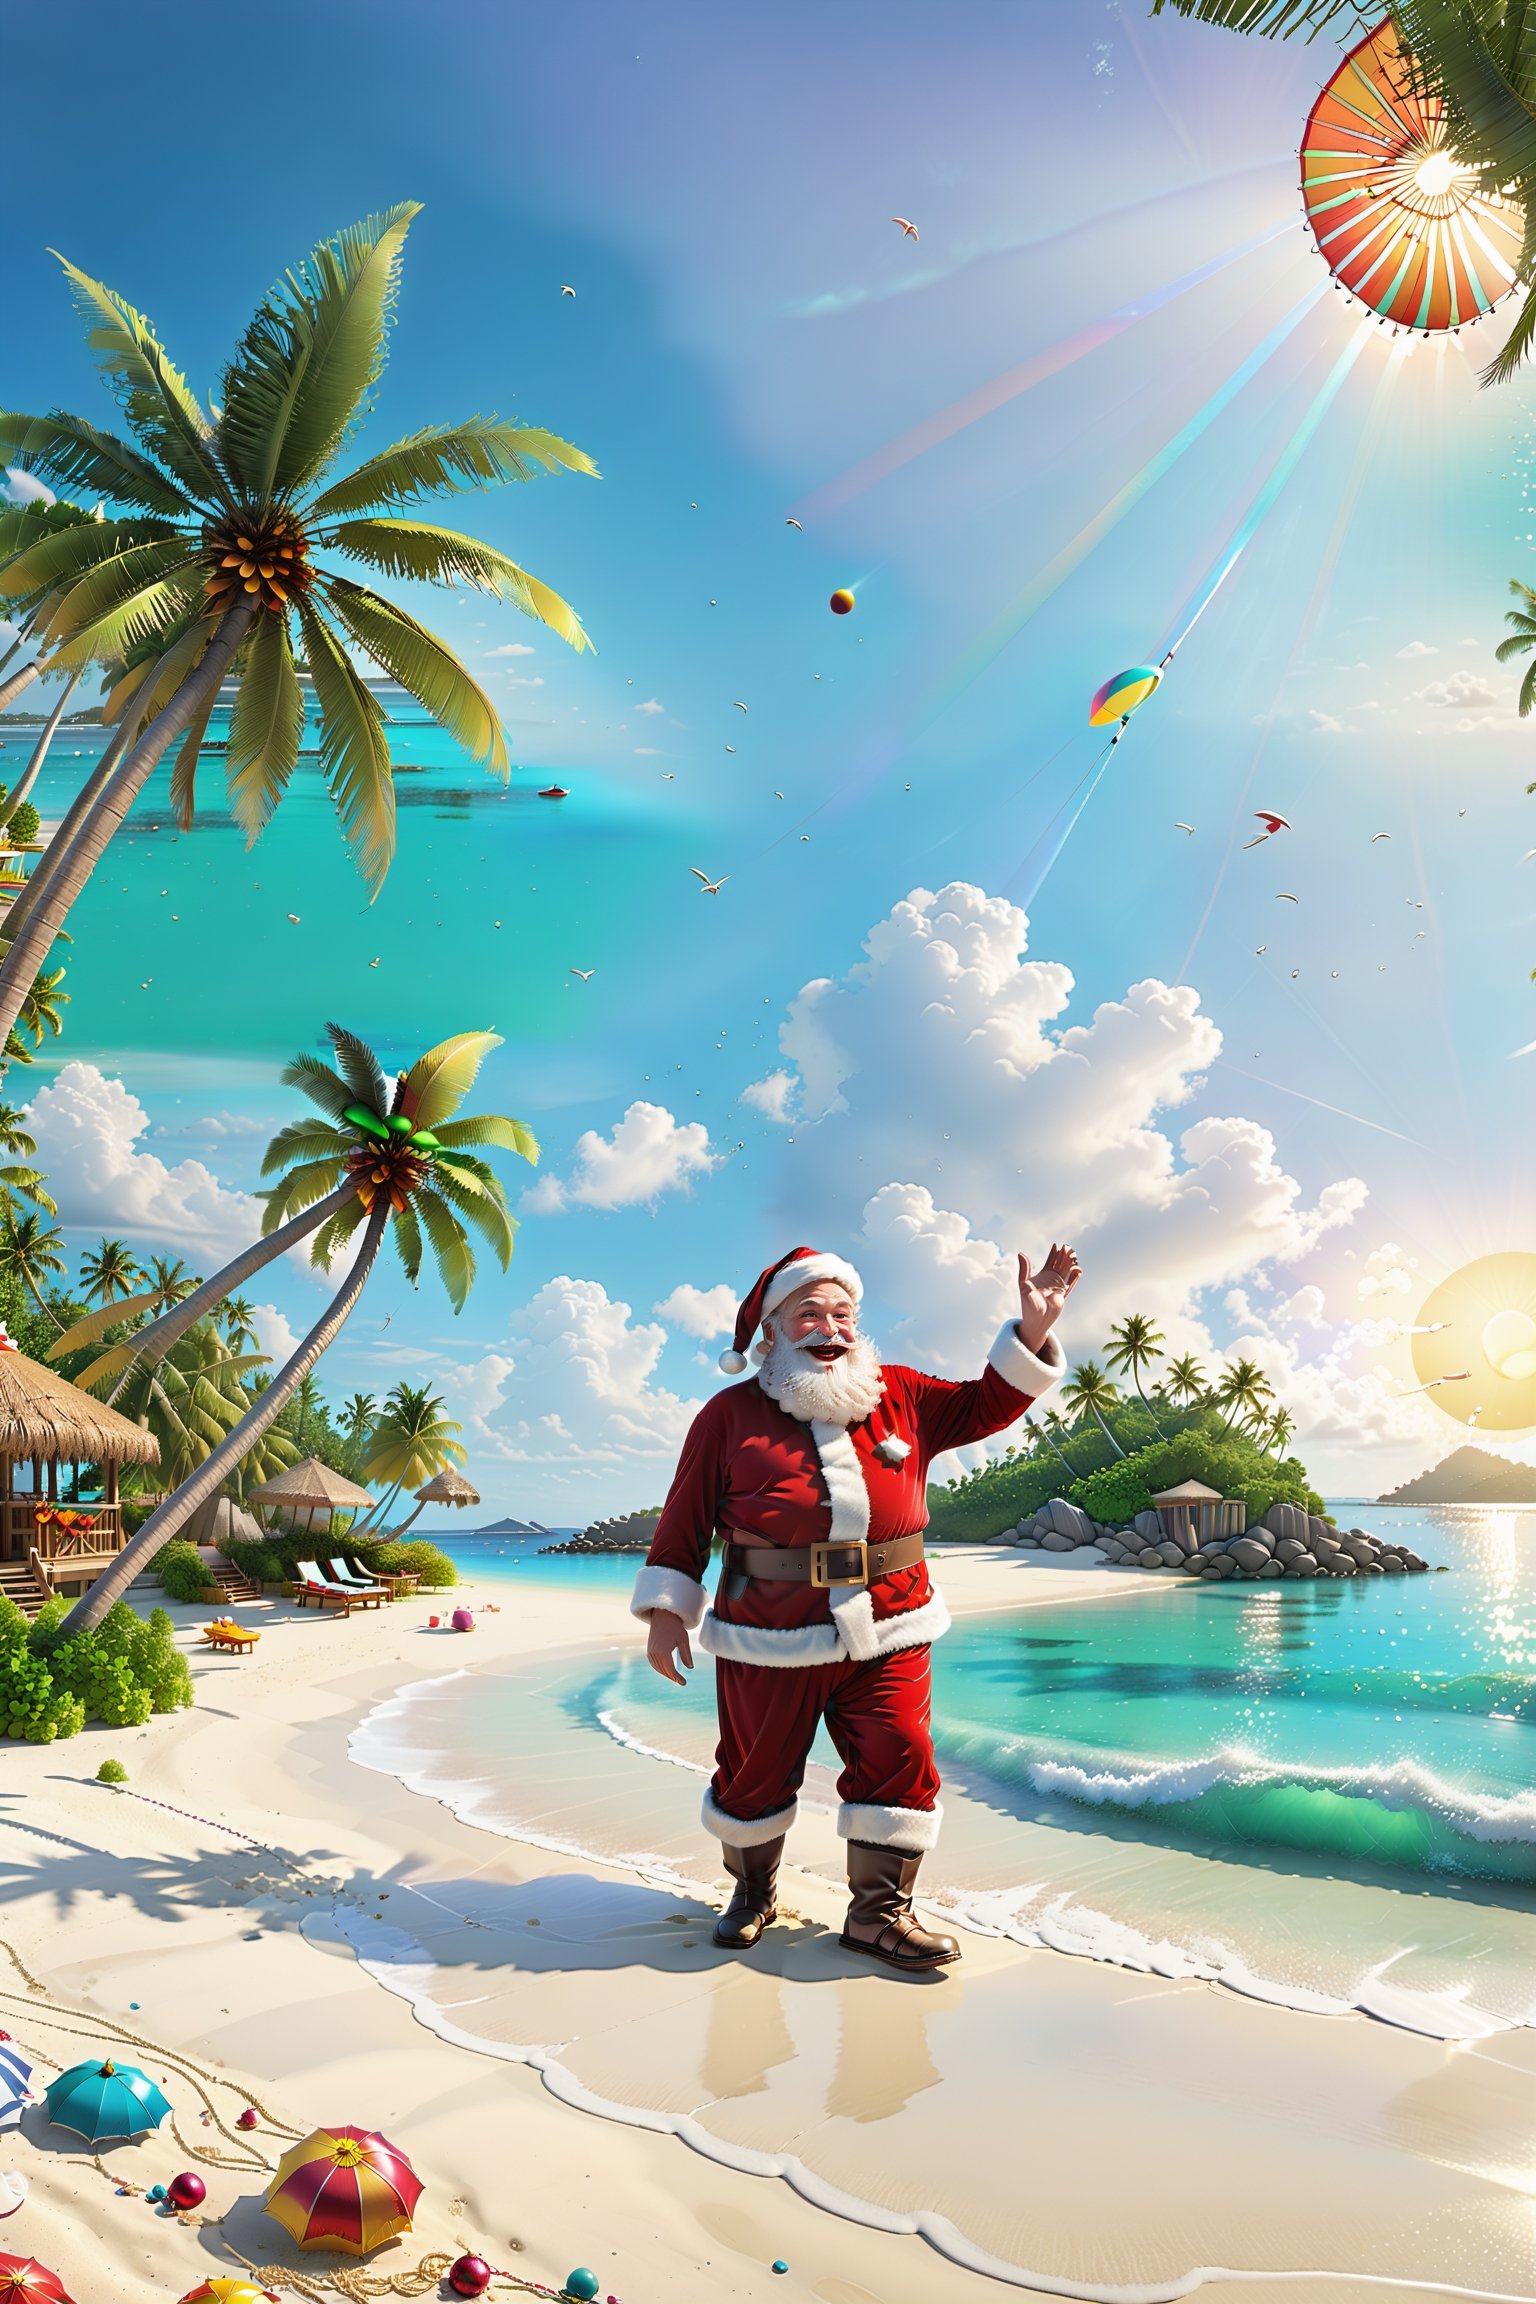 In this cheerful scene, {(((Santa Claus is on a sunny island)))}, embarking on an exotic Christmas vacation. The island is made up of golden sandy beaches, turquoise blue waters and emerald green coconut trees, just like a tropical paradise.

Santa Claus is dressed in relaxed vacation attire, possibly a short-sleeved plaid shirt with loose shorts and comfortable flip-flops. He held a colorful parasol in his hand, swaying gently with the breeze, as if he was enjoying this paradise-like resort.

Santa Claus steps onto the soft sandy beach with a string of coconut trees swaying lazily behind him. He may also be carrying a colorful surfboard, decorating the whole scene with even more energy. Or maybe he's holding a string of bright Christmas lights in his hand, dotting the coconut trees and bringing a festive atmosphere to this beach.

The ocean sparkles in the distance, welcoming the waves that gently lap on the beach. Perhaps there is a small boat moored in the distance, waiting for the next sea adventure. The whole image reveals a relaxed, pleasant and festive delight, giving a Christmas atmosphere that is different from the traditional but equally cozy.